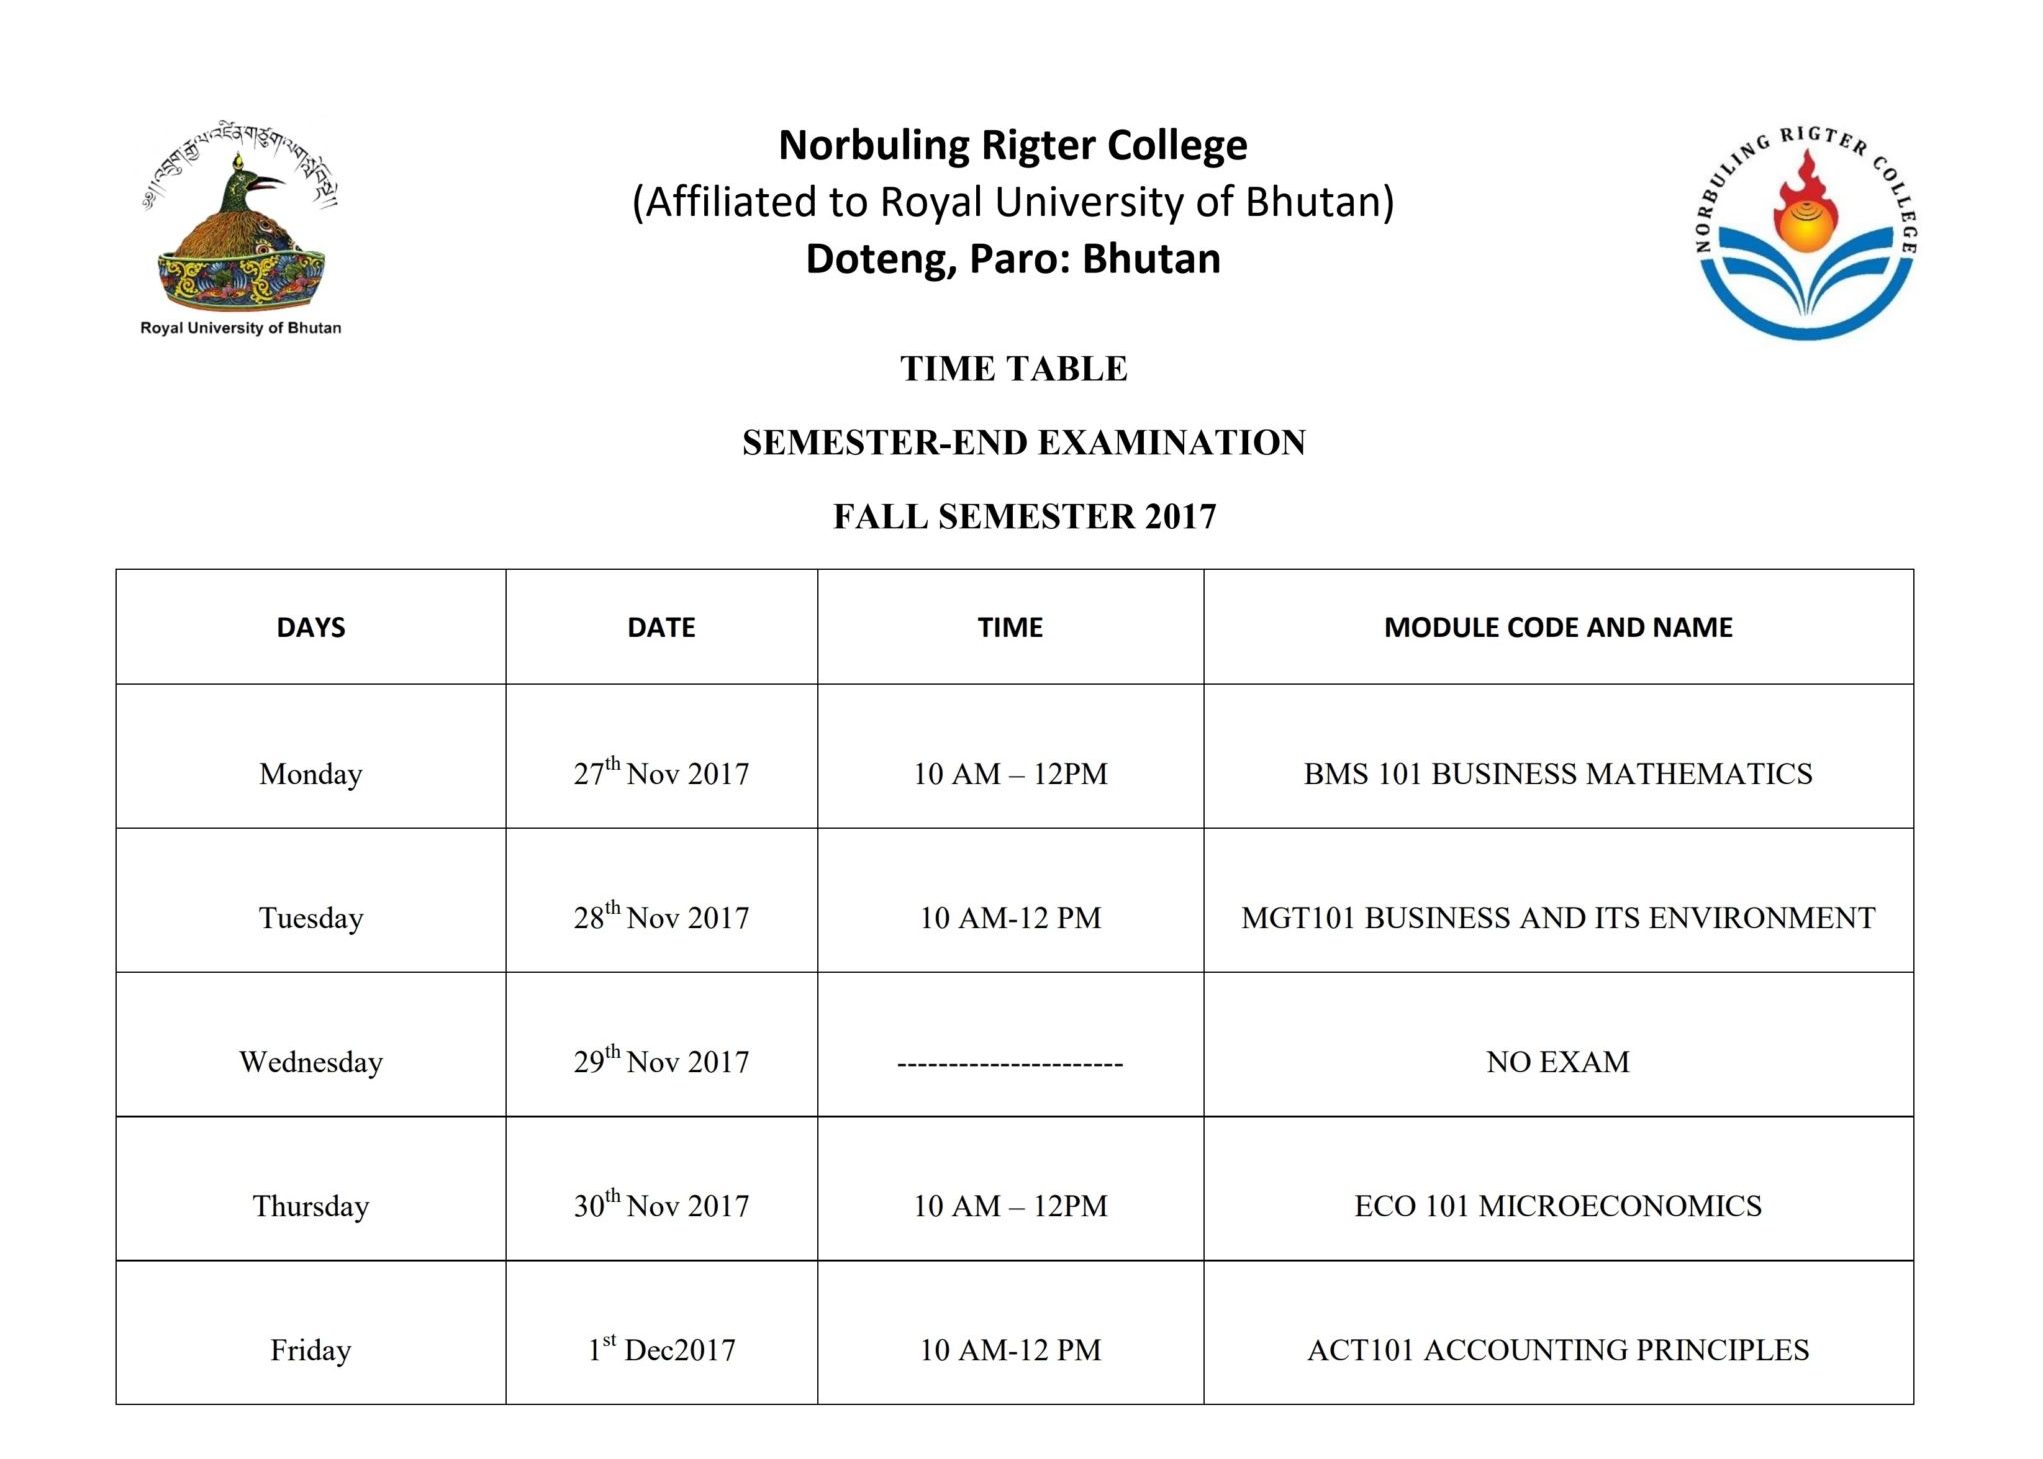 SEMESTEREND EXAMINATION TIME TABLE Norbuling Rigter College